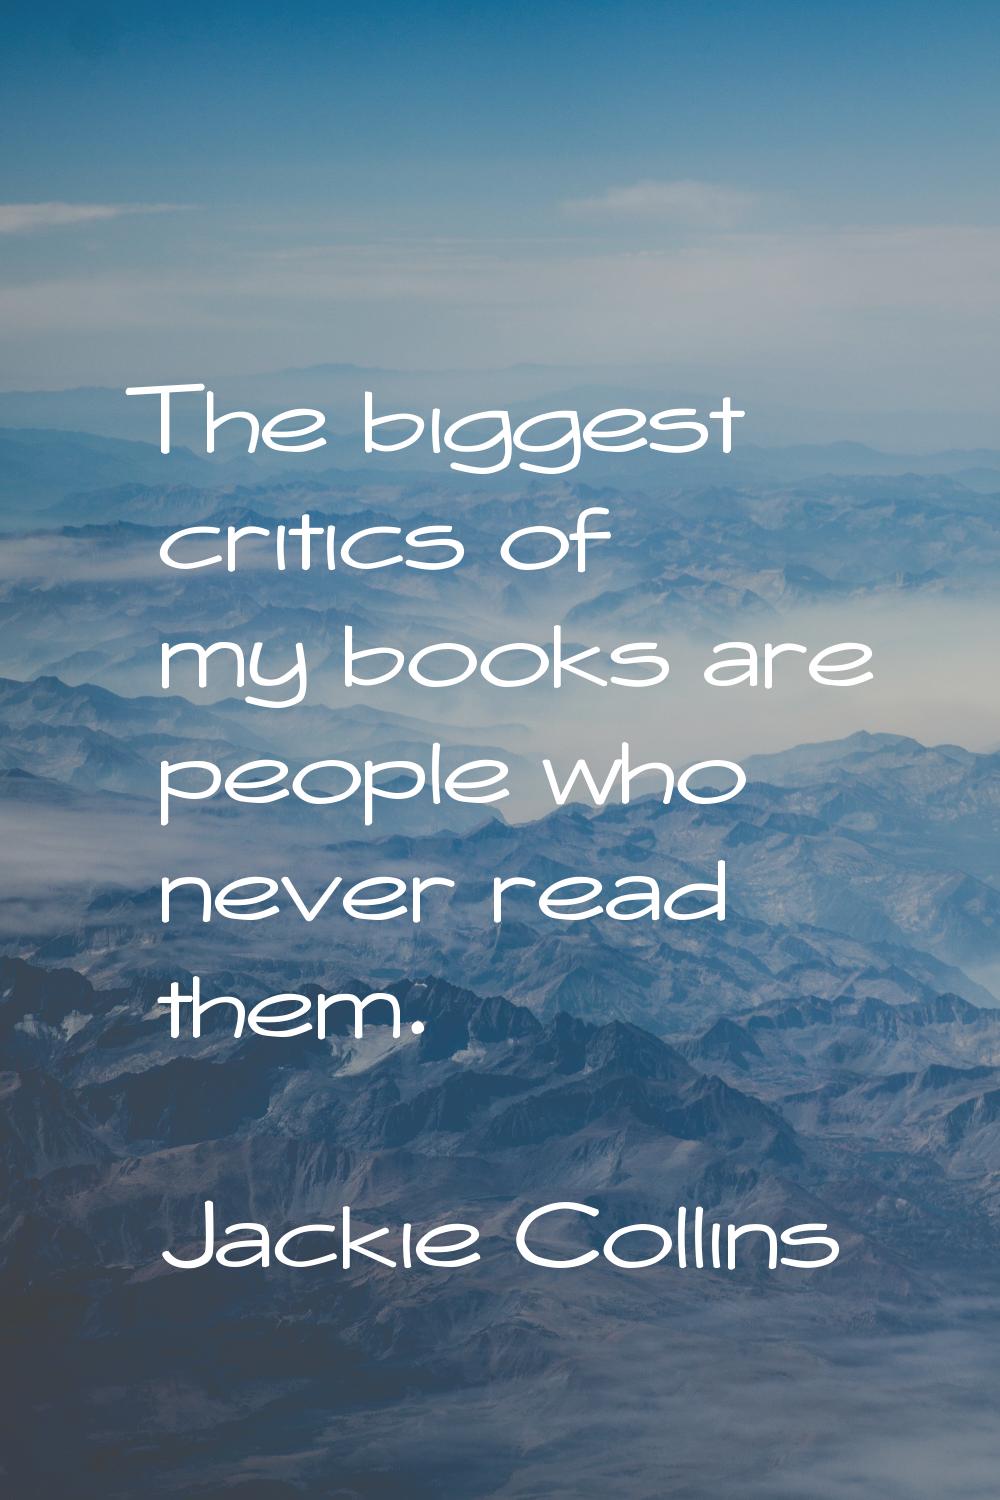 The biggest critics of my books are people who never read them.